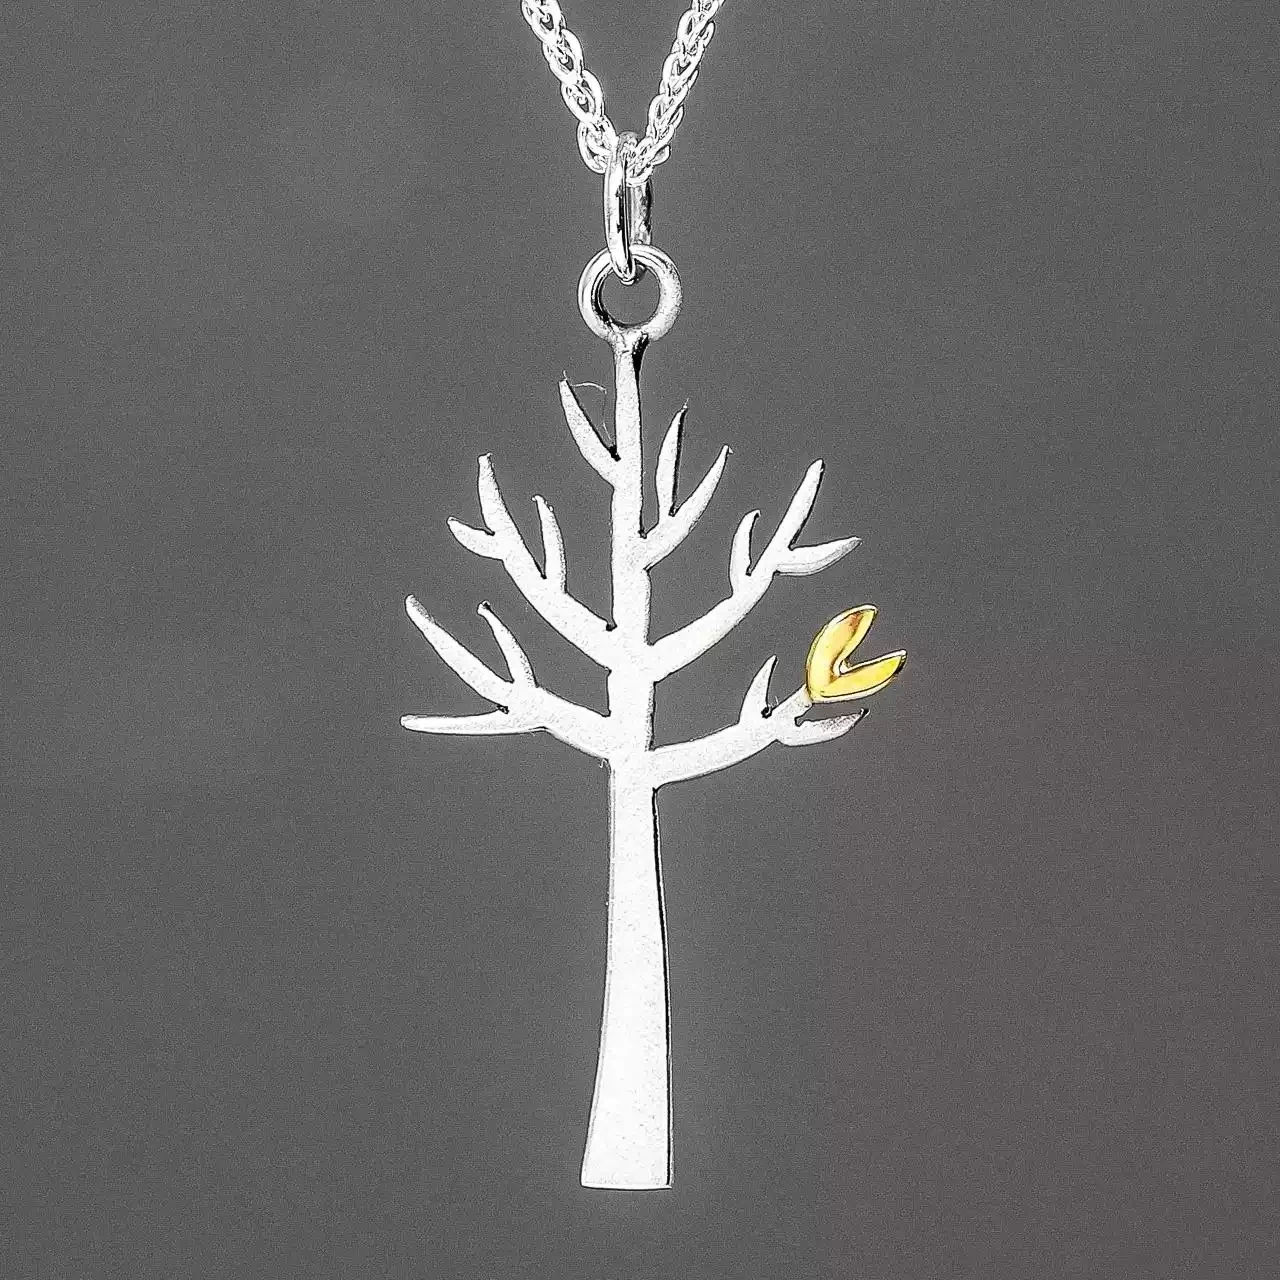 Woodlands Tree Silver and Gold Necklace - Large by Linda Macdonald